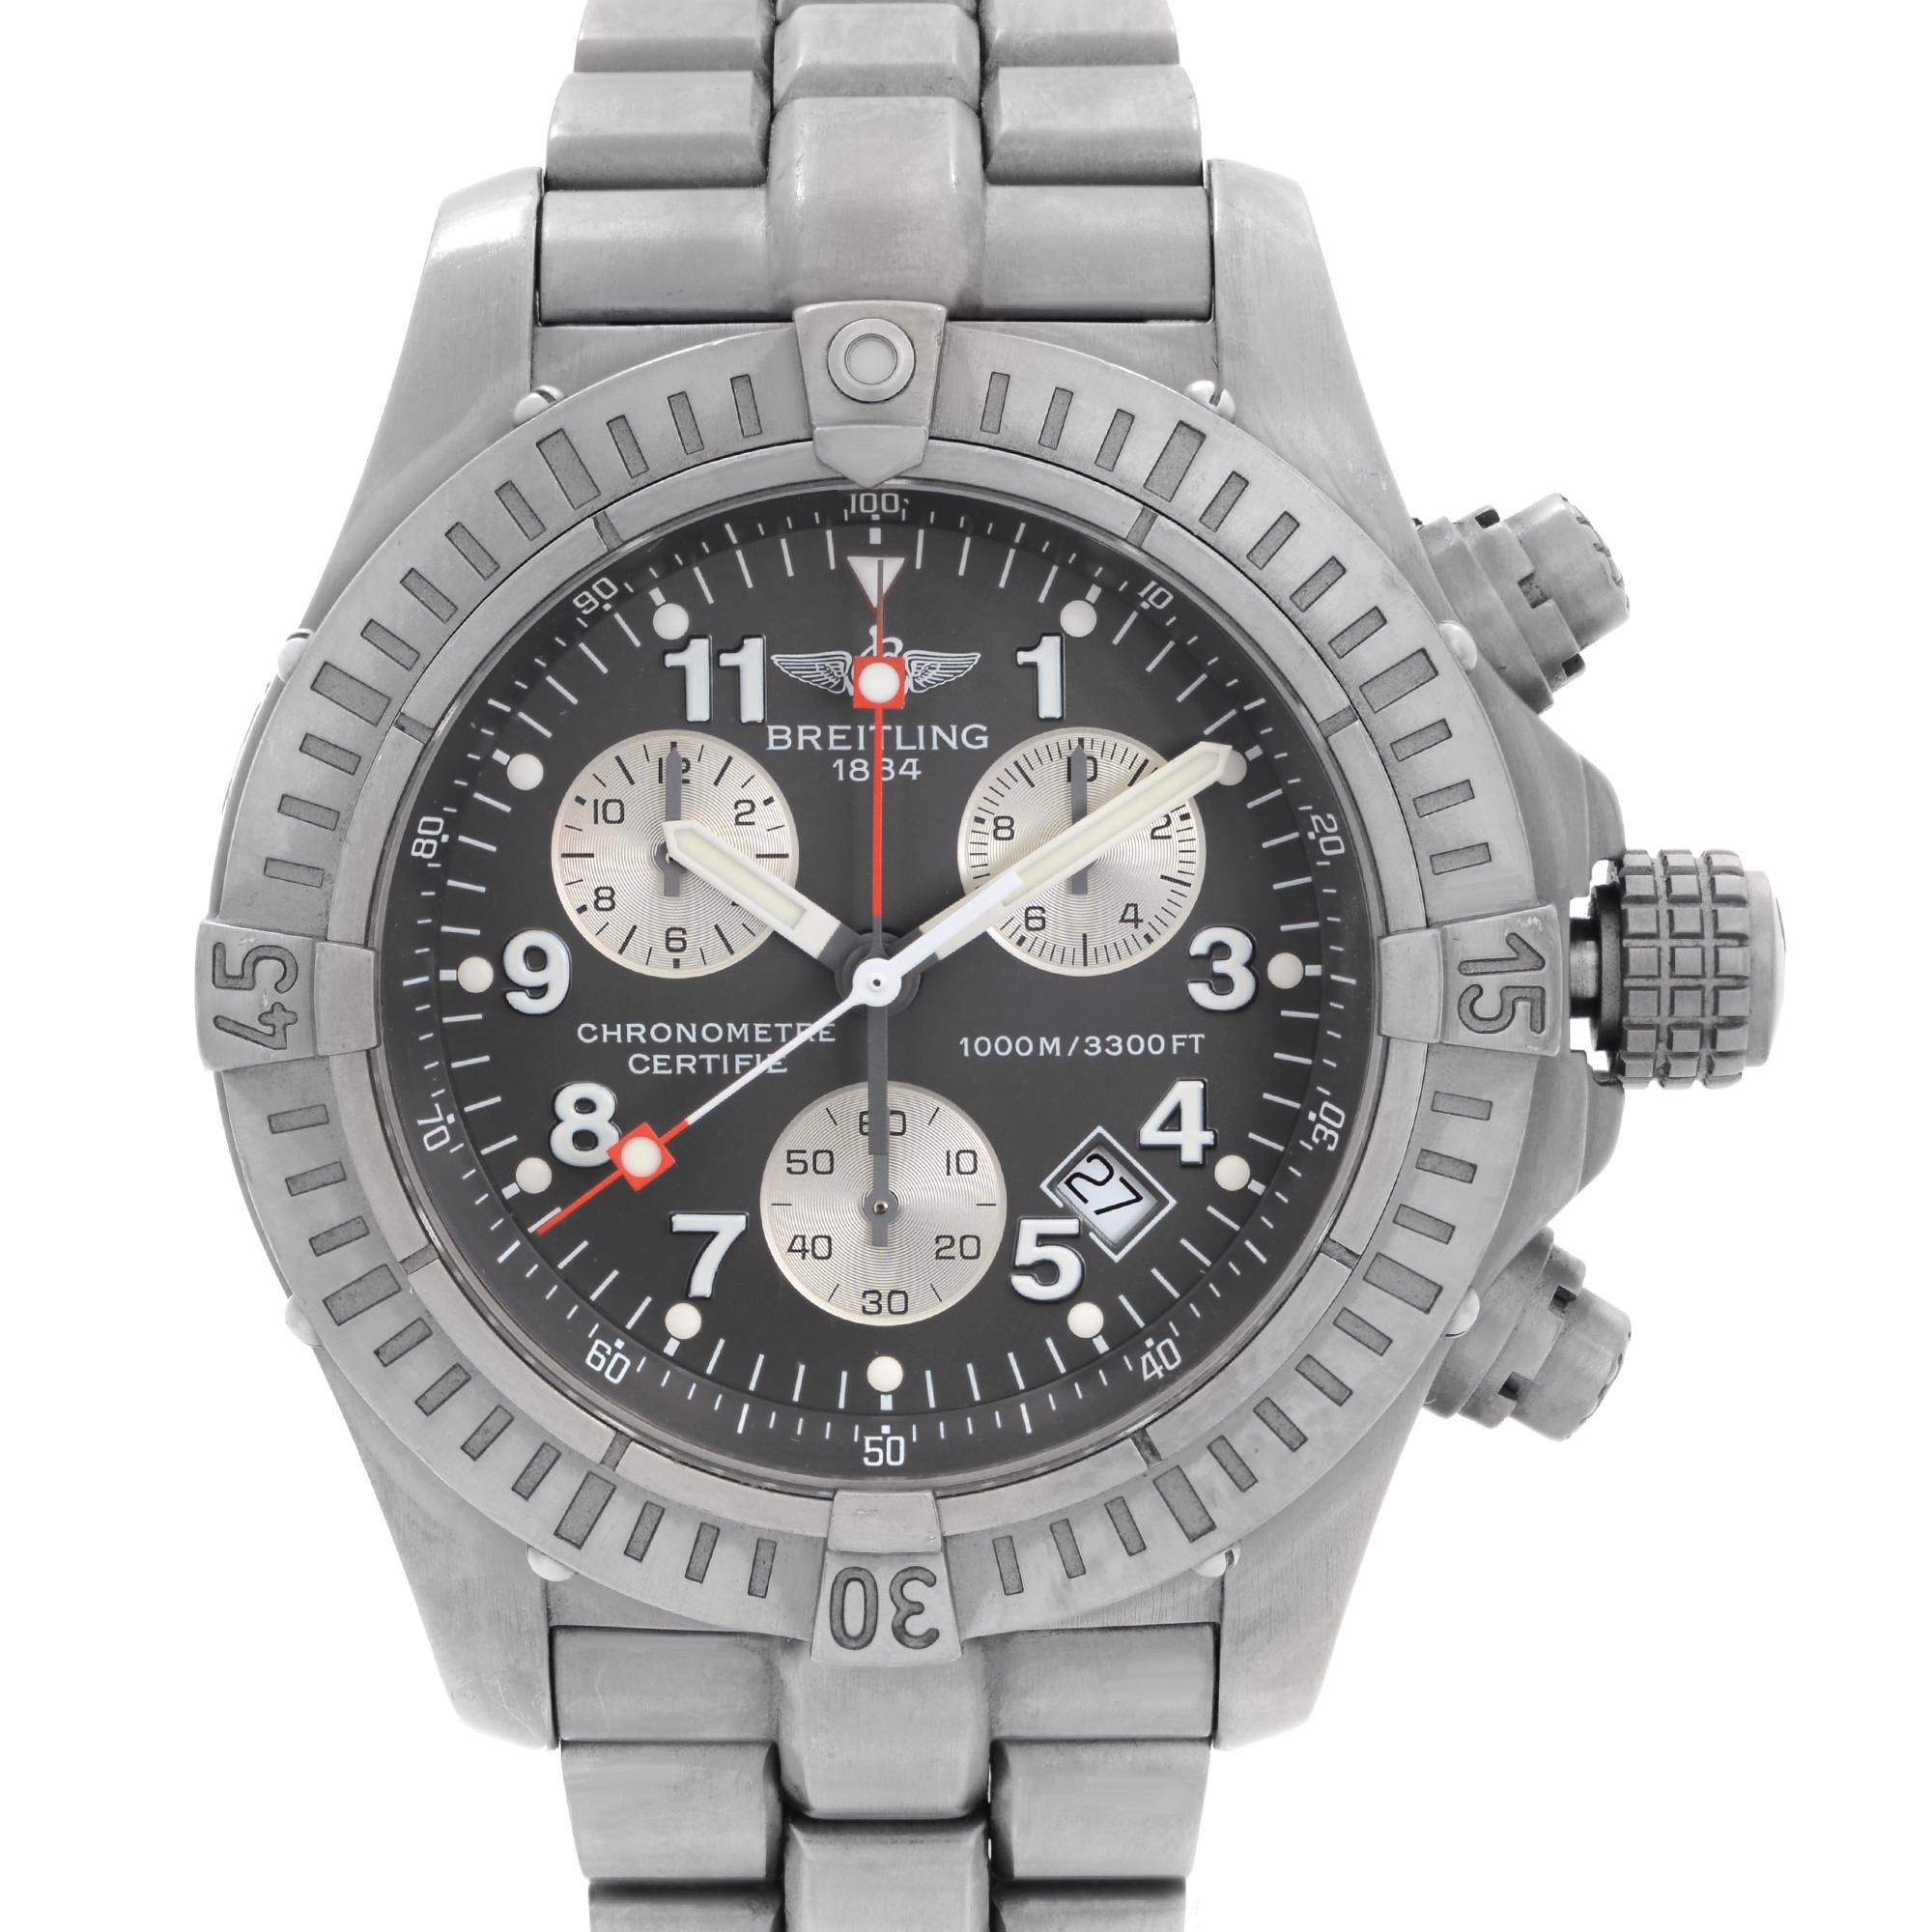 Pre-owned Breitling Chrono Avenger M1 44mm Titanium Gray Dial Mens Quartz Watch E73360 Minor Nicks and Scratches on the Bezel, Near the Helium Escape Value and Crown. Minor Slack on the Bracelet, This Timepiece is Powered by Quartz (Battery)